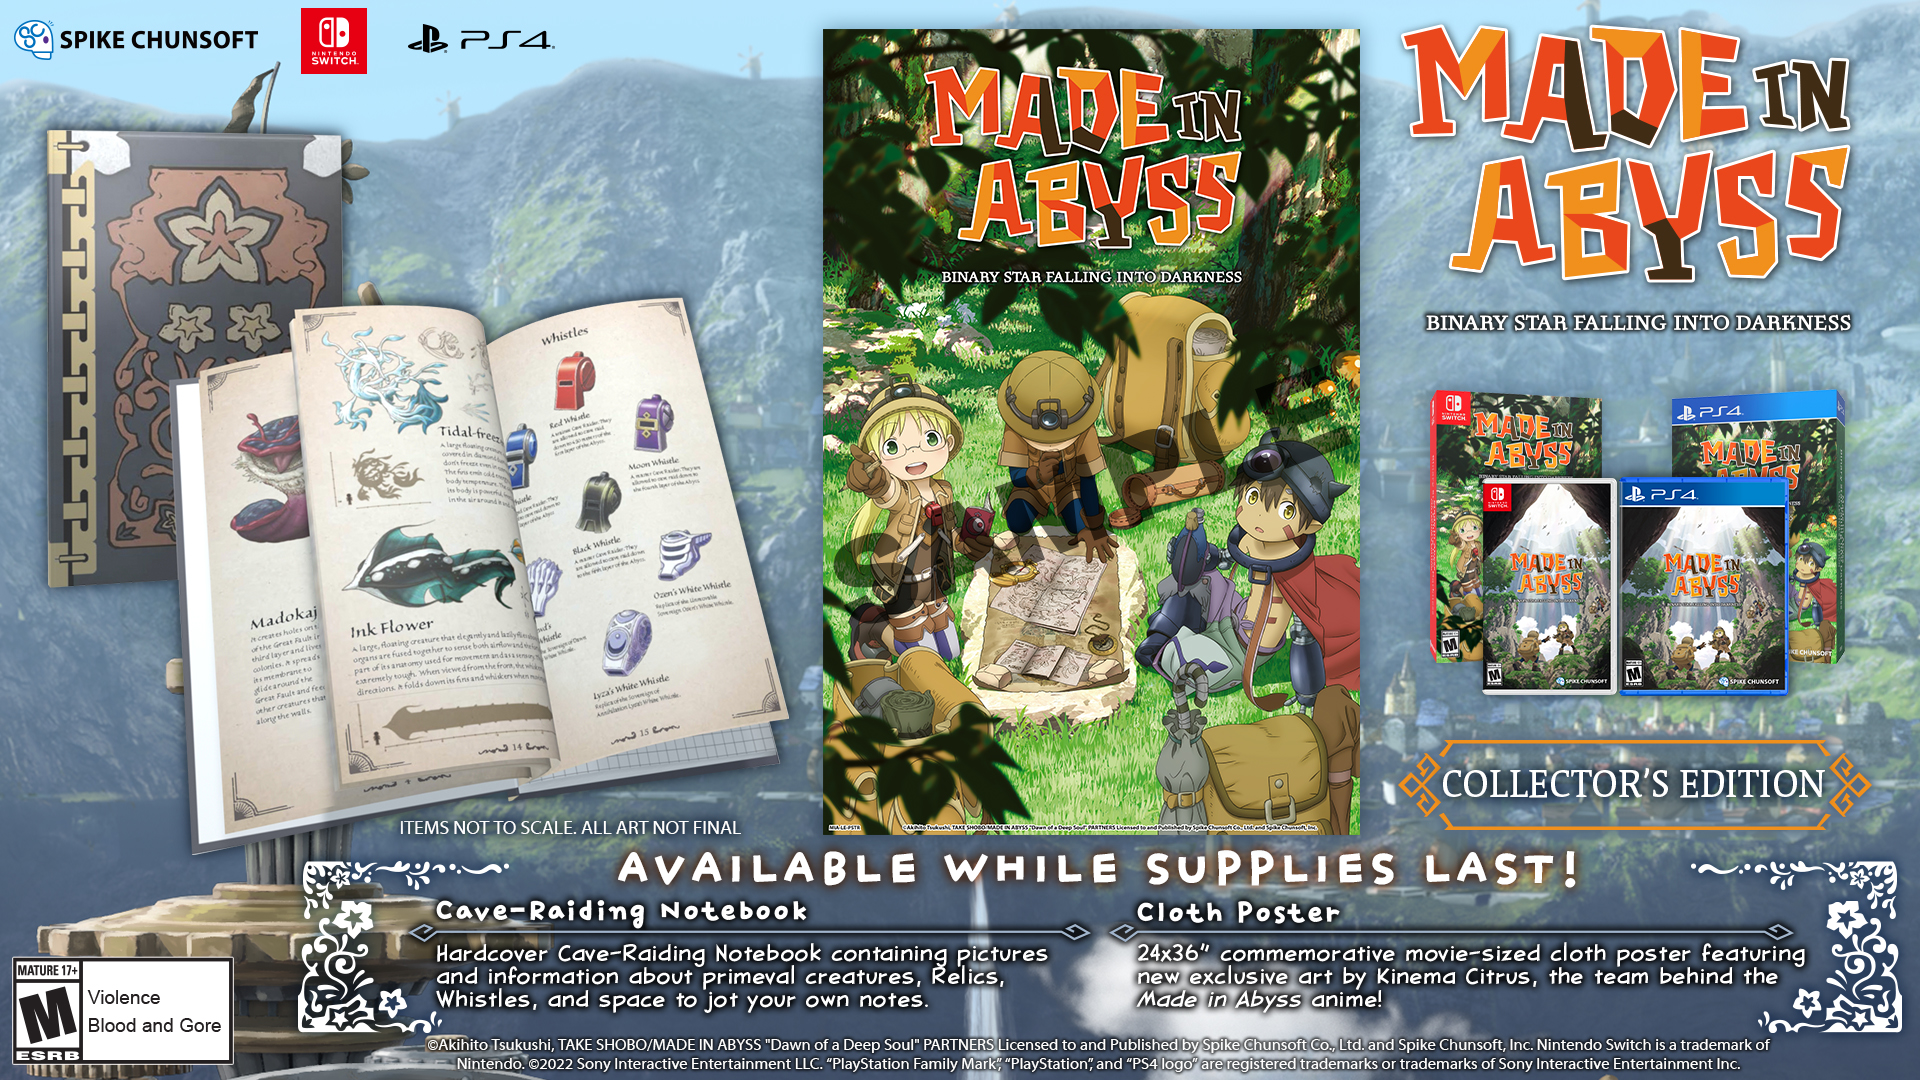 5 Best Places to Watch Made in Abyss Season 2